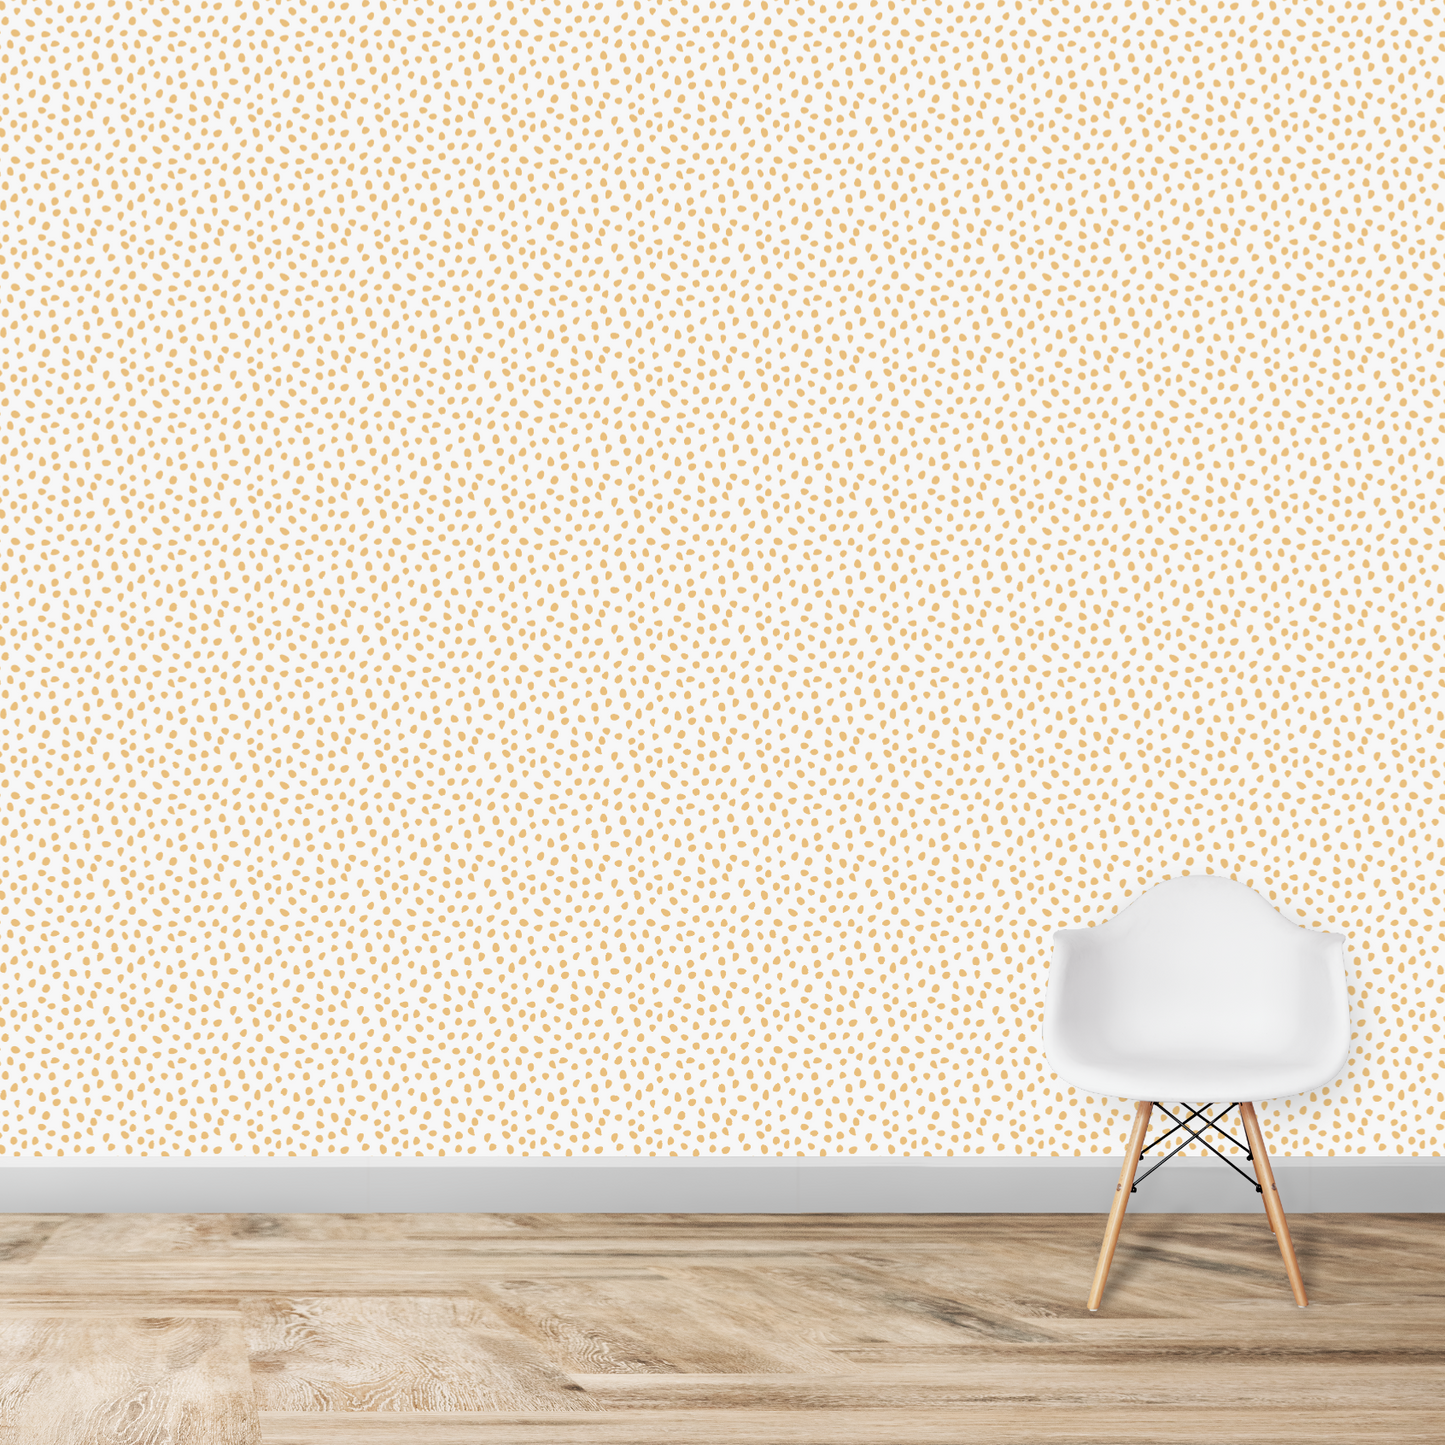 Load image into Gallery viewer, Sprinkle Wallpaper Repeat Pattern - Mustard - Munks and Me Wallpaper
